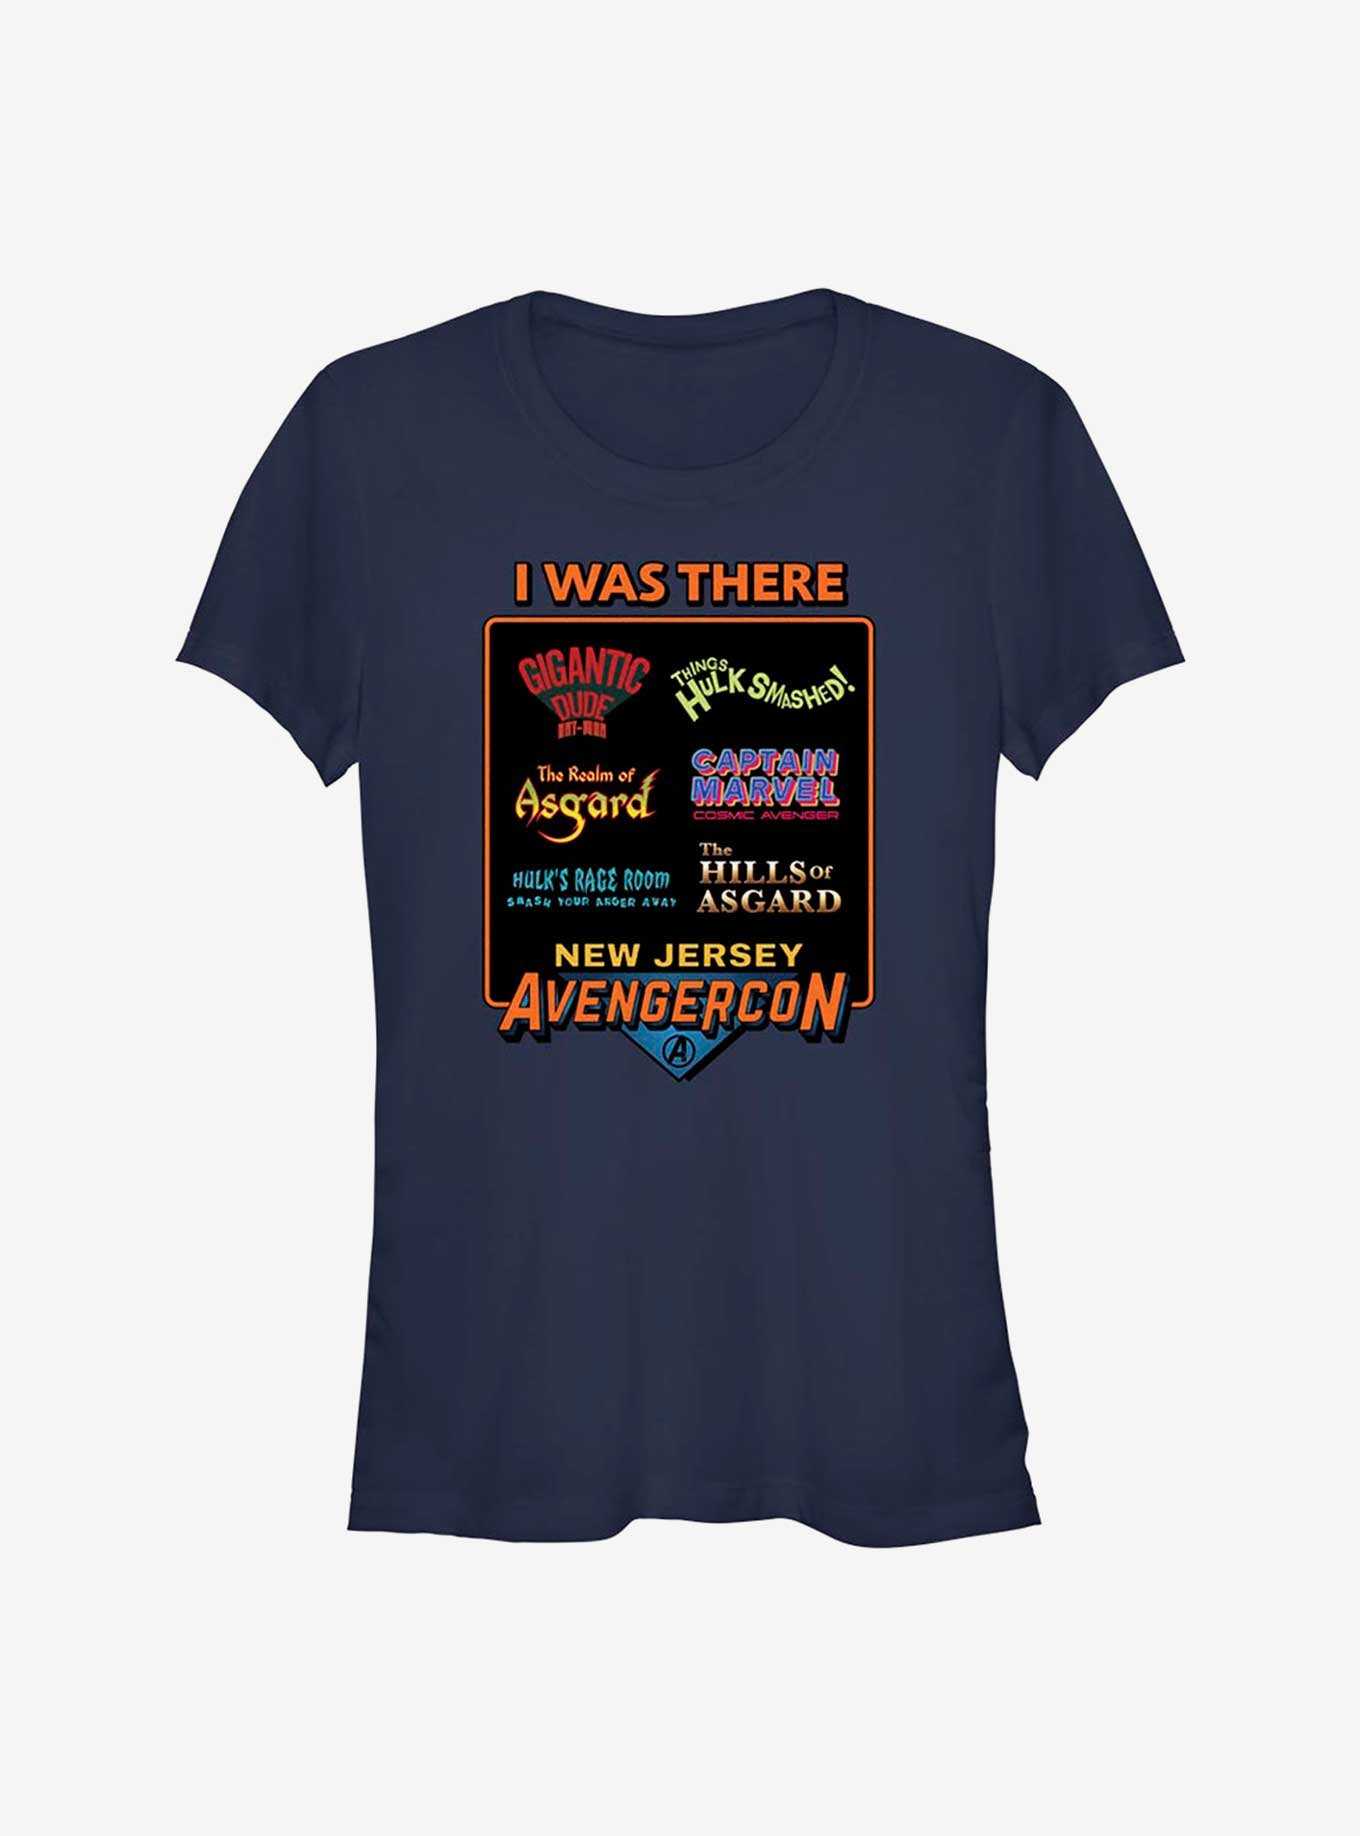 Marvel Ms. Marvel Avengerscon I Was There Girls T-Shirt, , hi-res